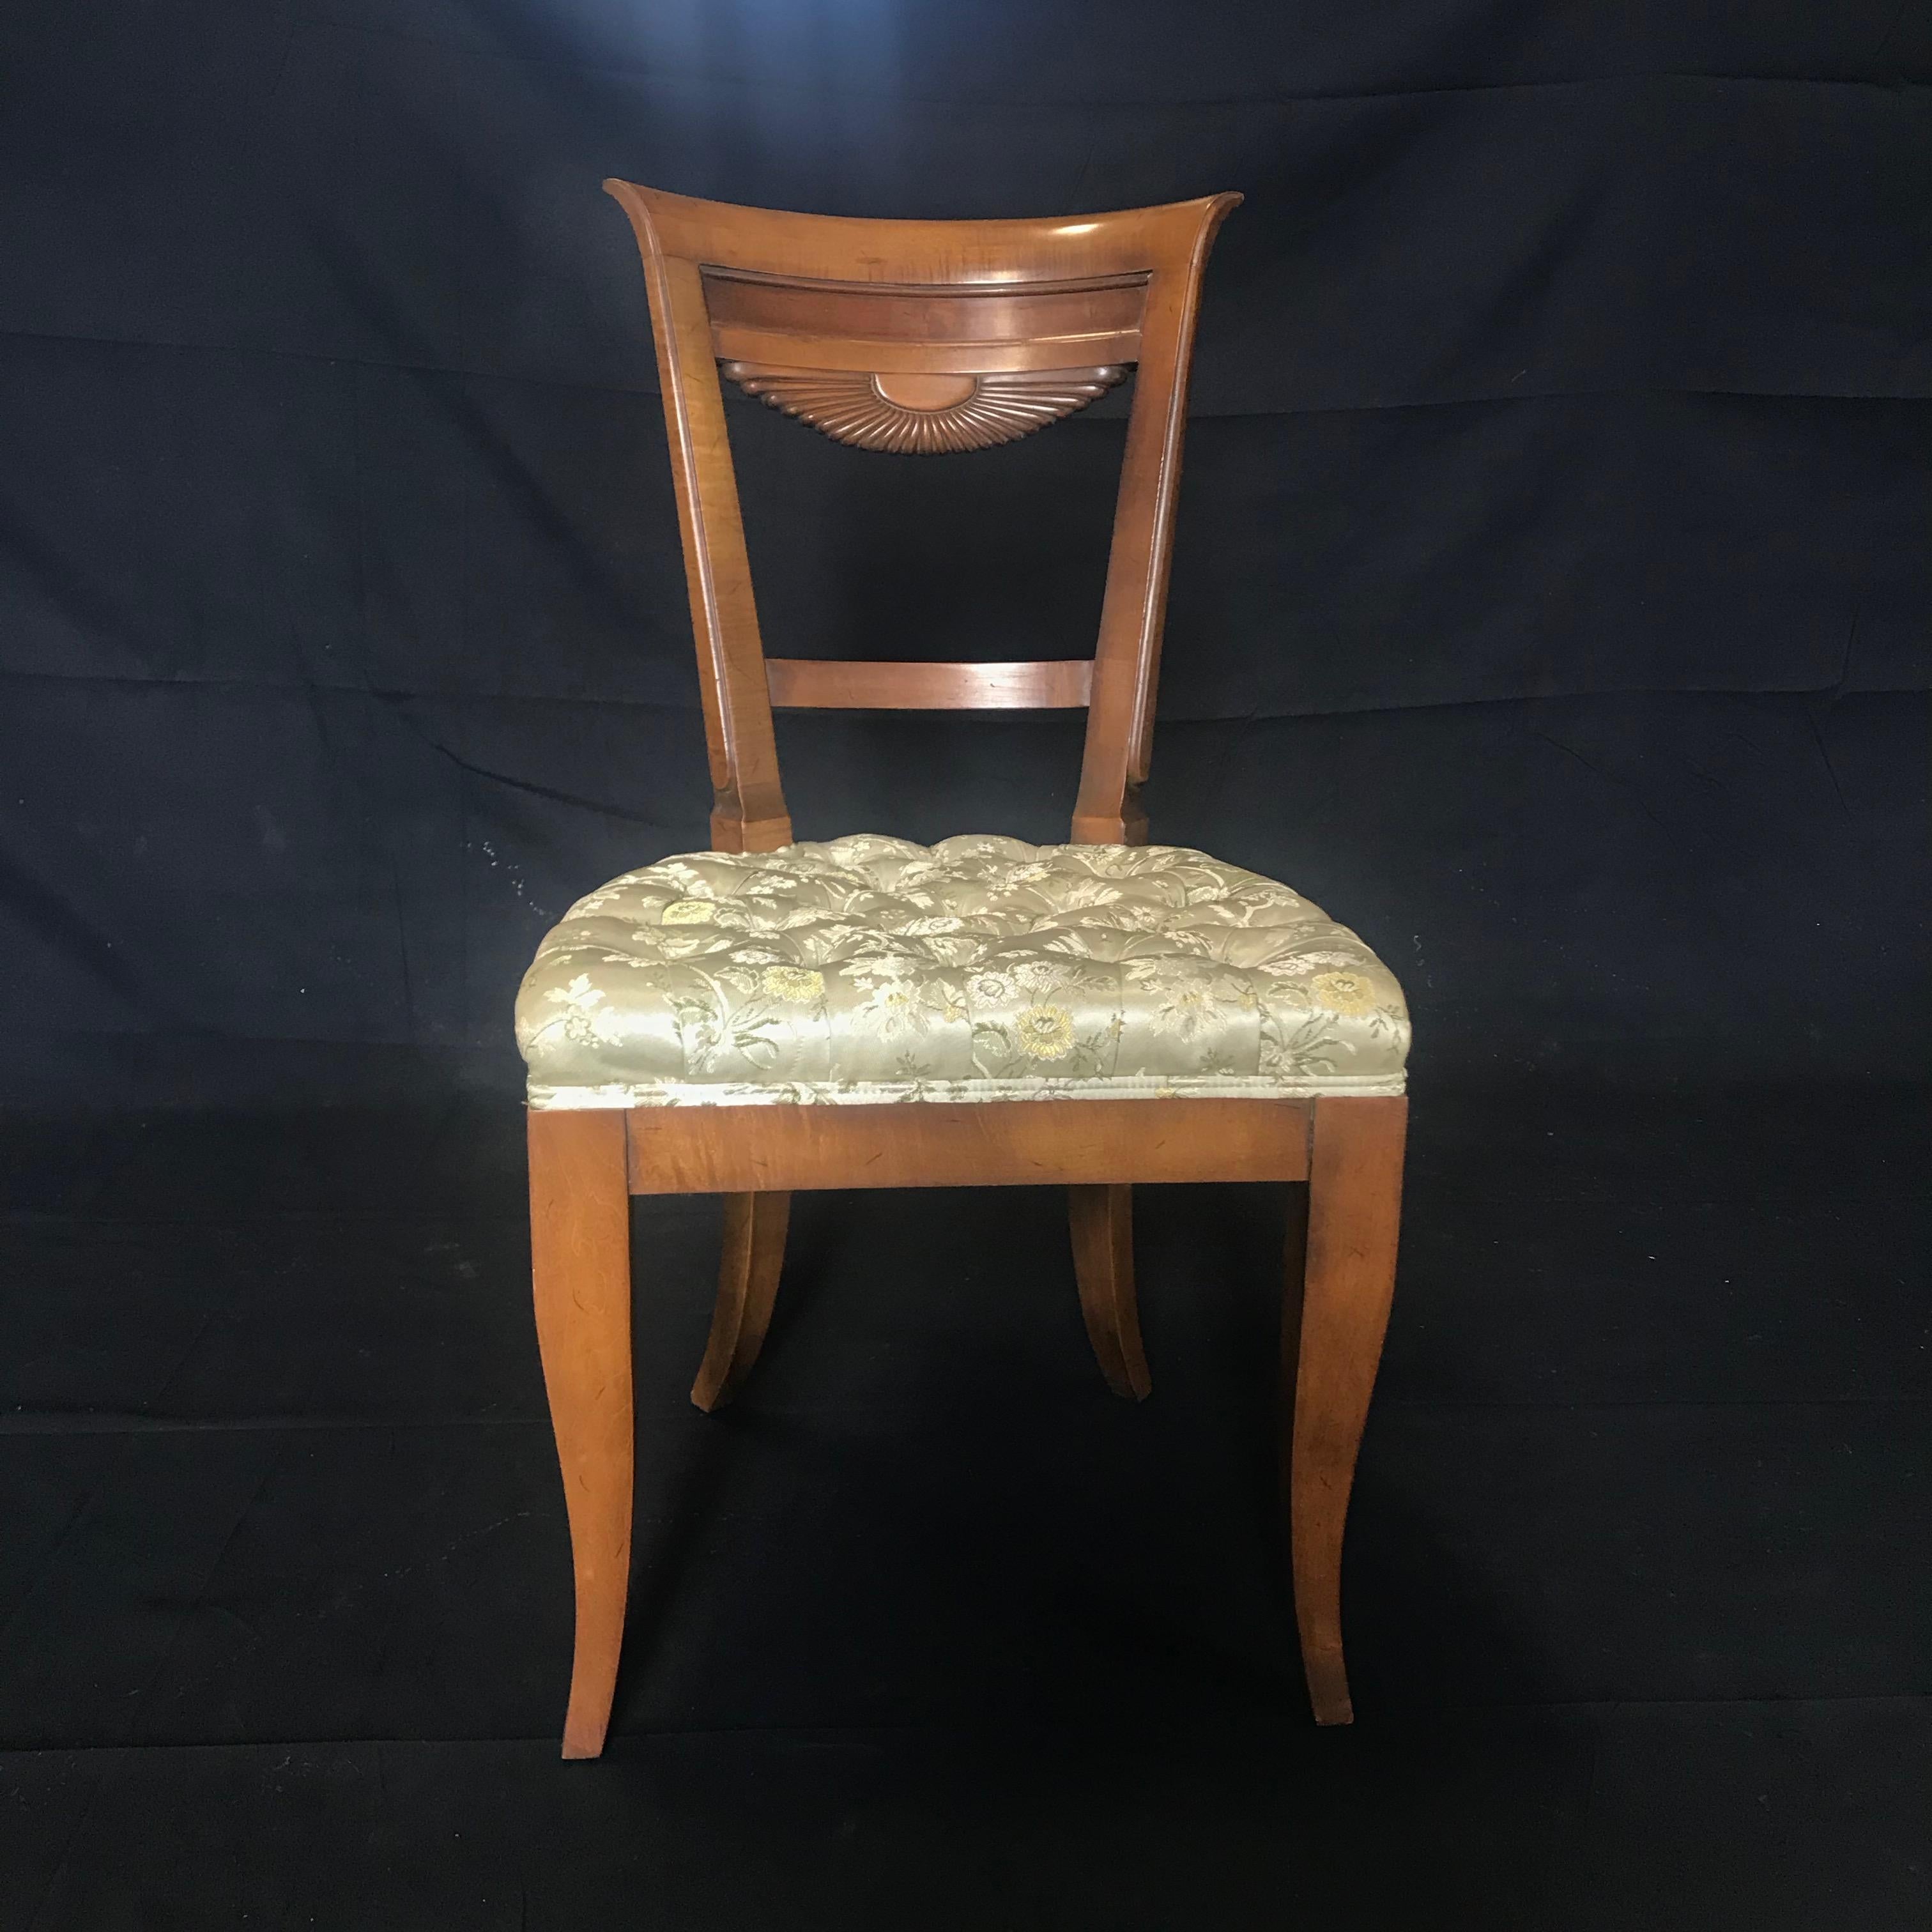 Set of four French walnut midcentury dining chairs with a beautiful fan back design and turned legs, upholstered in a neutral immaculate tufted tapestry silk. 
#4989

Measures: H seat 18.5”.